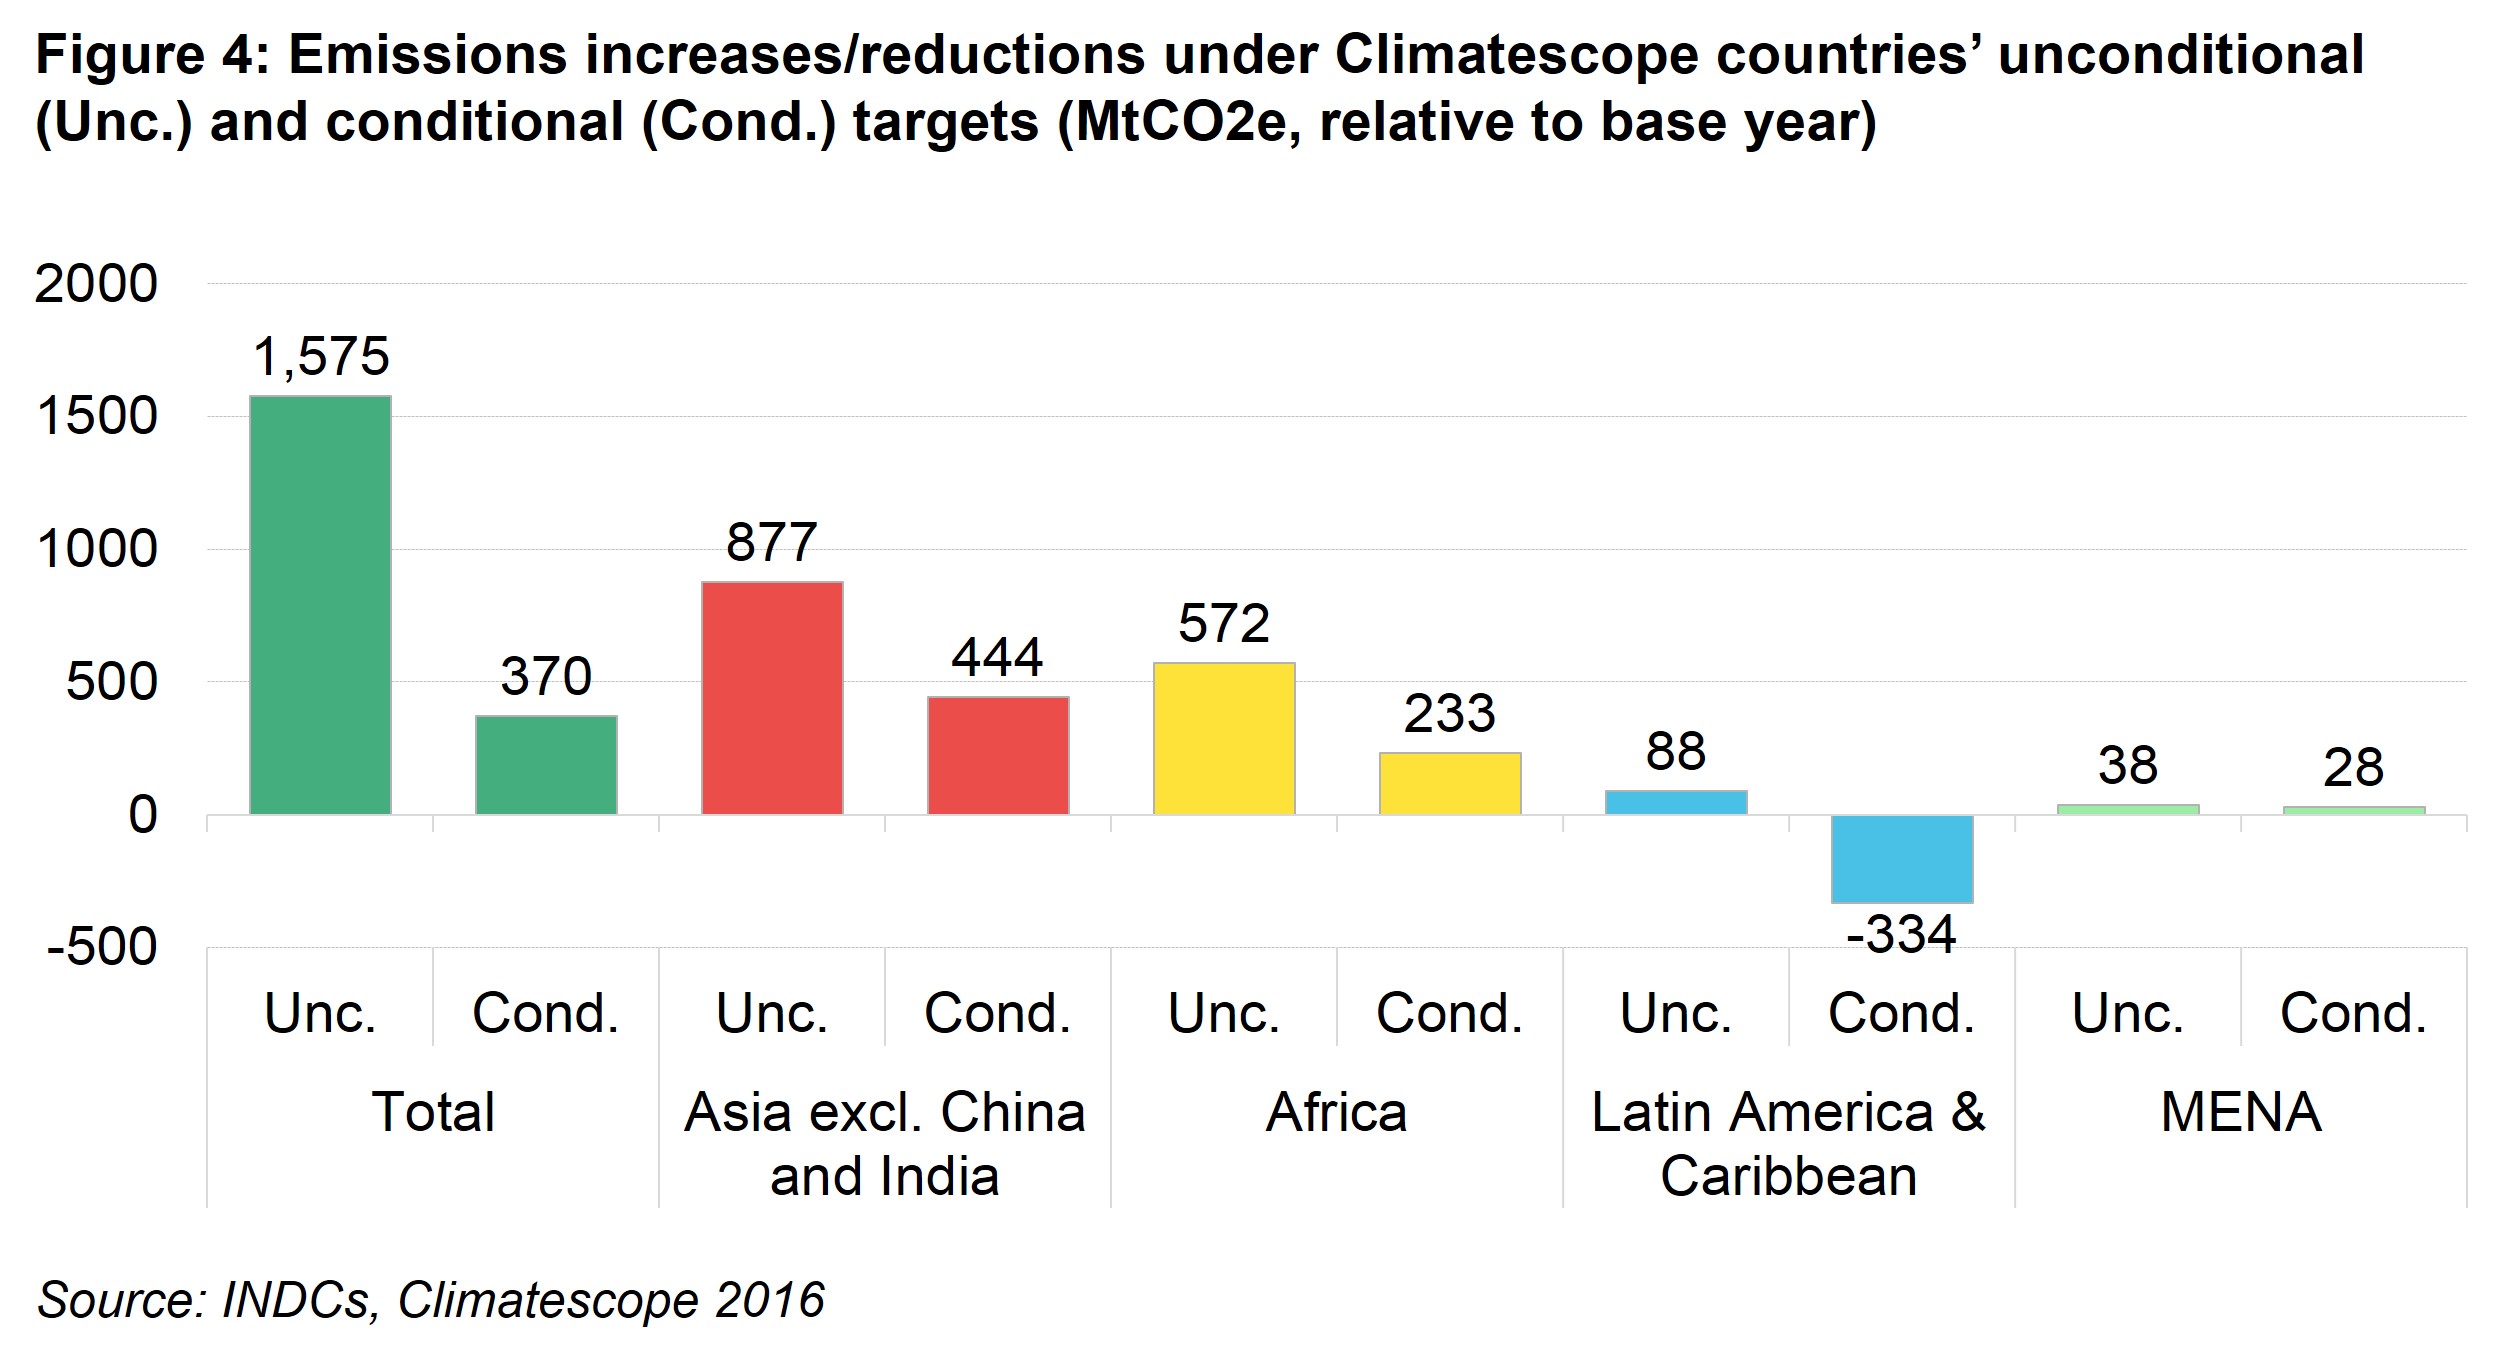 PIV Fig 4 - Emissions increases/reductions under Climatescope countries’ unconditional (Unc.) and conditional (Cond.) targets (MtCO2e, relative to base year)